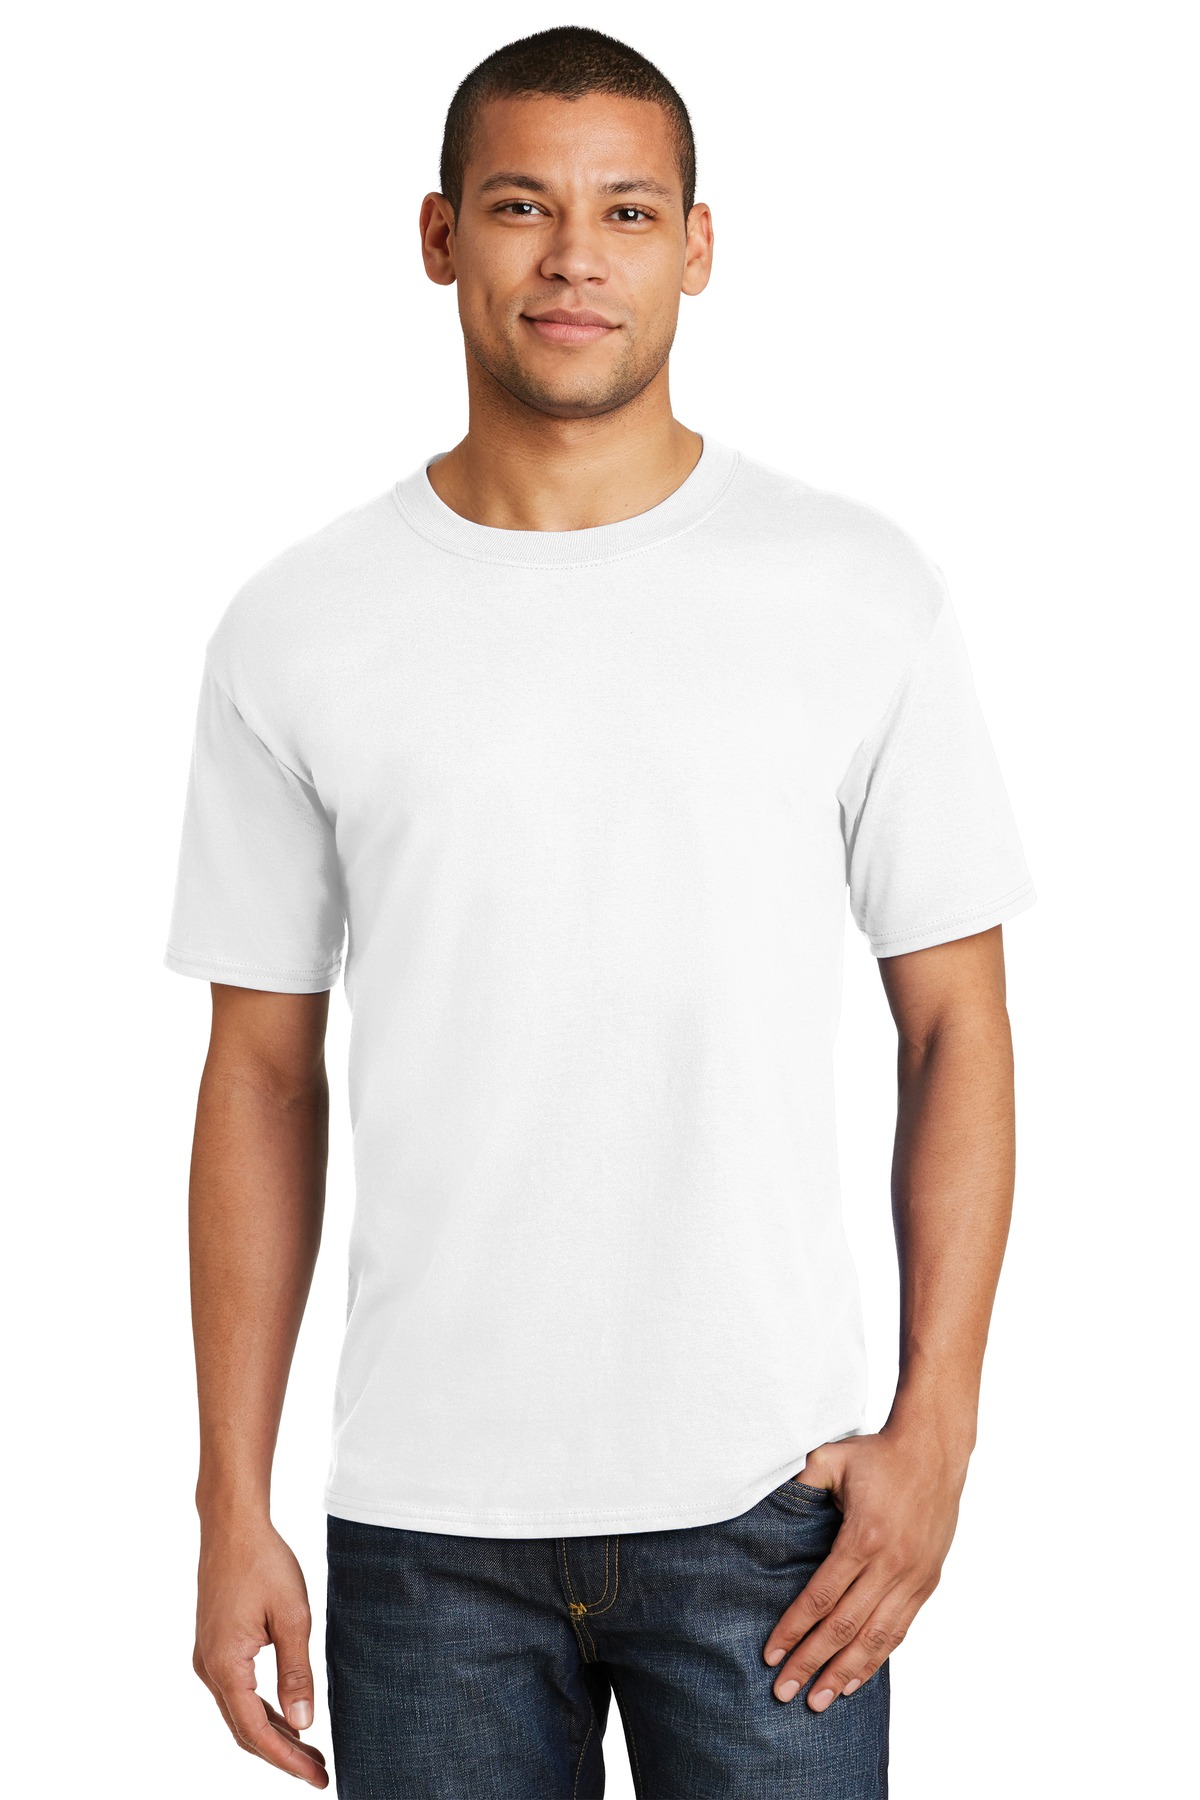 Hanes T-Shirts for Corporate Hospitality ® Beefy-T® - 100% Cotton T-Shirt.-Hanes